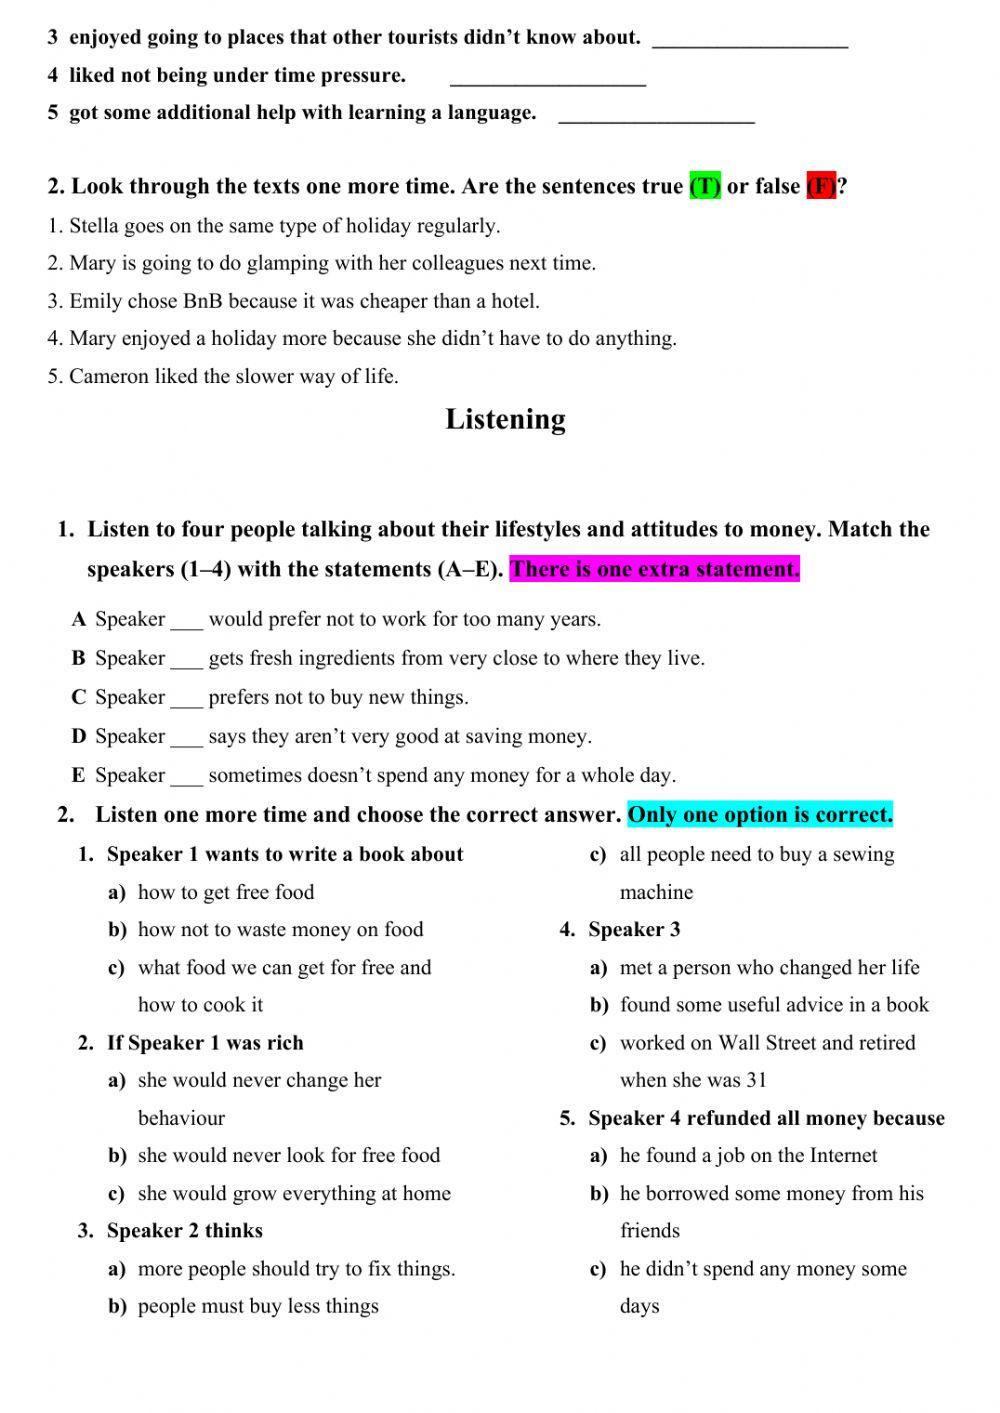 Reading and Listening Exam Solutions Pre-Intermediate